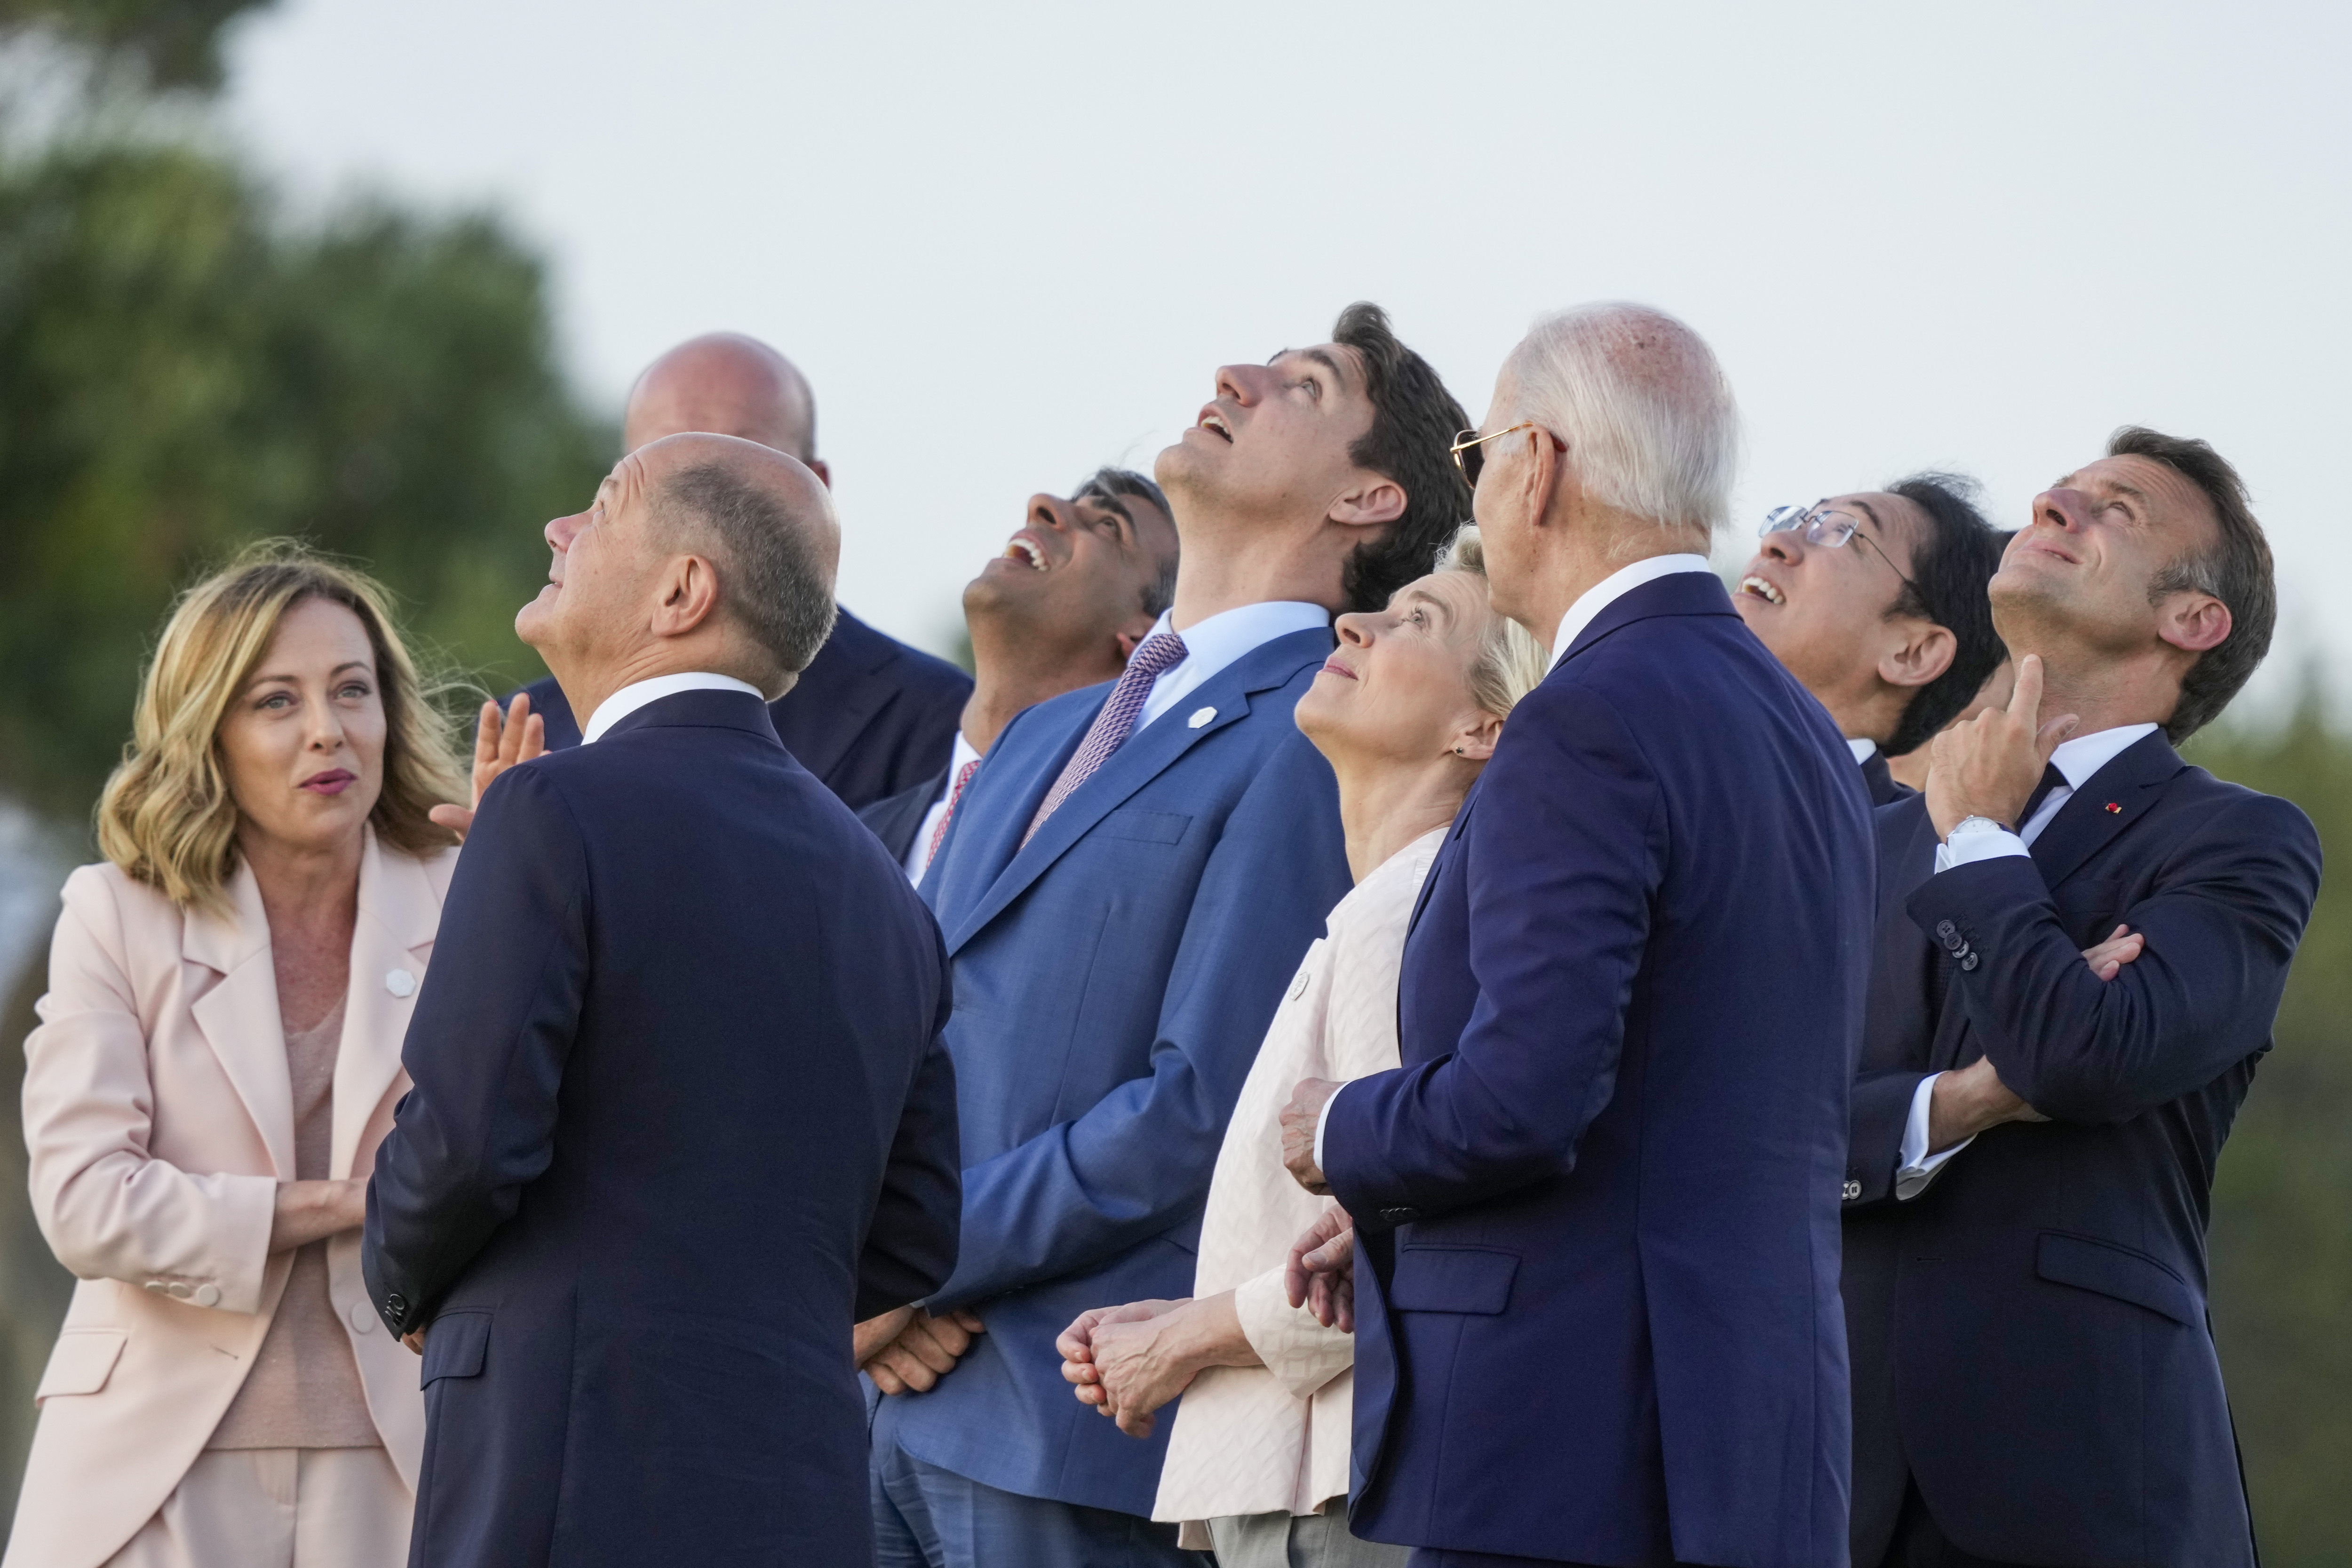 FILE - From right, French President Emmanuel Macron, Japan's Prime Minister Fumio Kishida, U.S. President Joe Biden, European Commission President Ursula von der Leyen, Canada's Prime Minister Justin Trudeau, Britain's Prime Minister Rishi Sunak, European Council President Charles Michel, German Chancellor Olaf Scholz and Italian Prime Minister Giorgia Meloni watch a skydiving demo during the G7 world leaders summit at Borgo Egnazia, Italy, Thursday, June 13, 2024. In France and Germany, the governments were weakened in elections this year. Italy is led by a prime minister whose party has neo-fascist roots, while an anti-immigrant party heads a shaky coalition in the Netherlands and Spain's Cabinet relies on small parties to rule. (AP Photo/Luca Bruno, File)